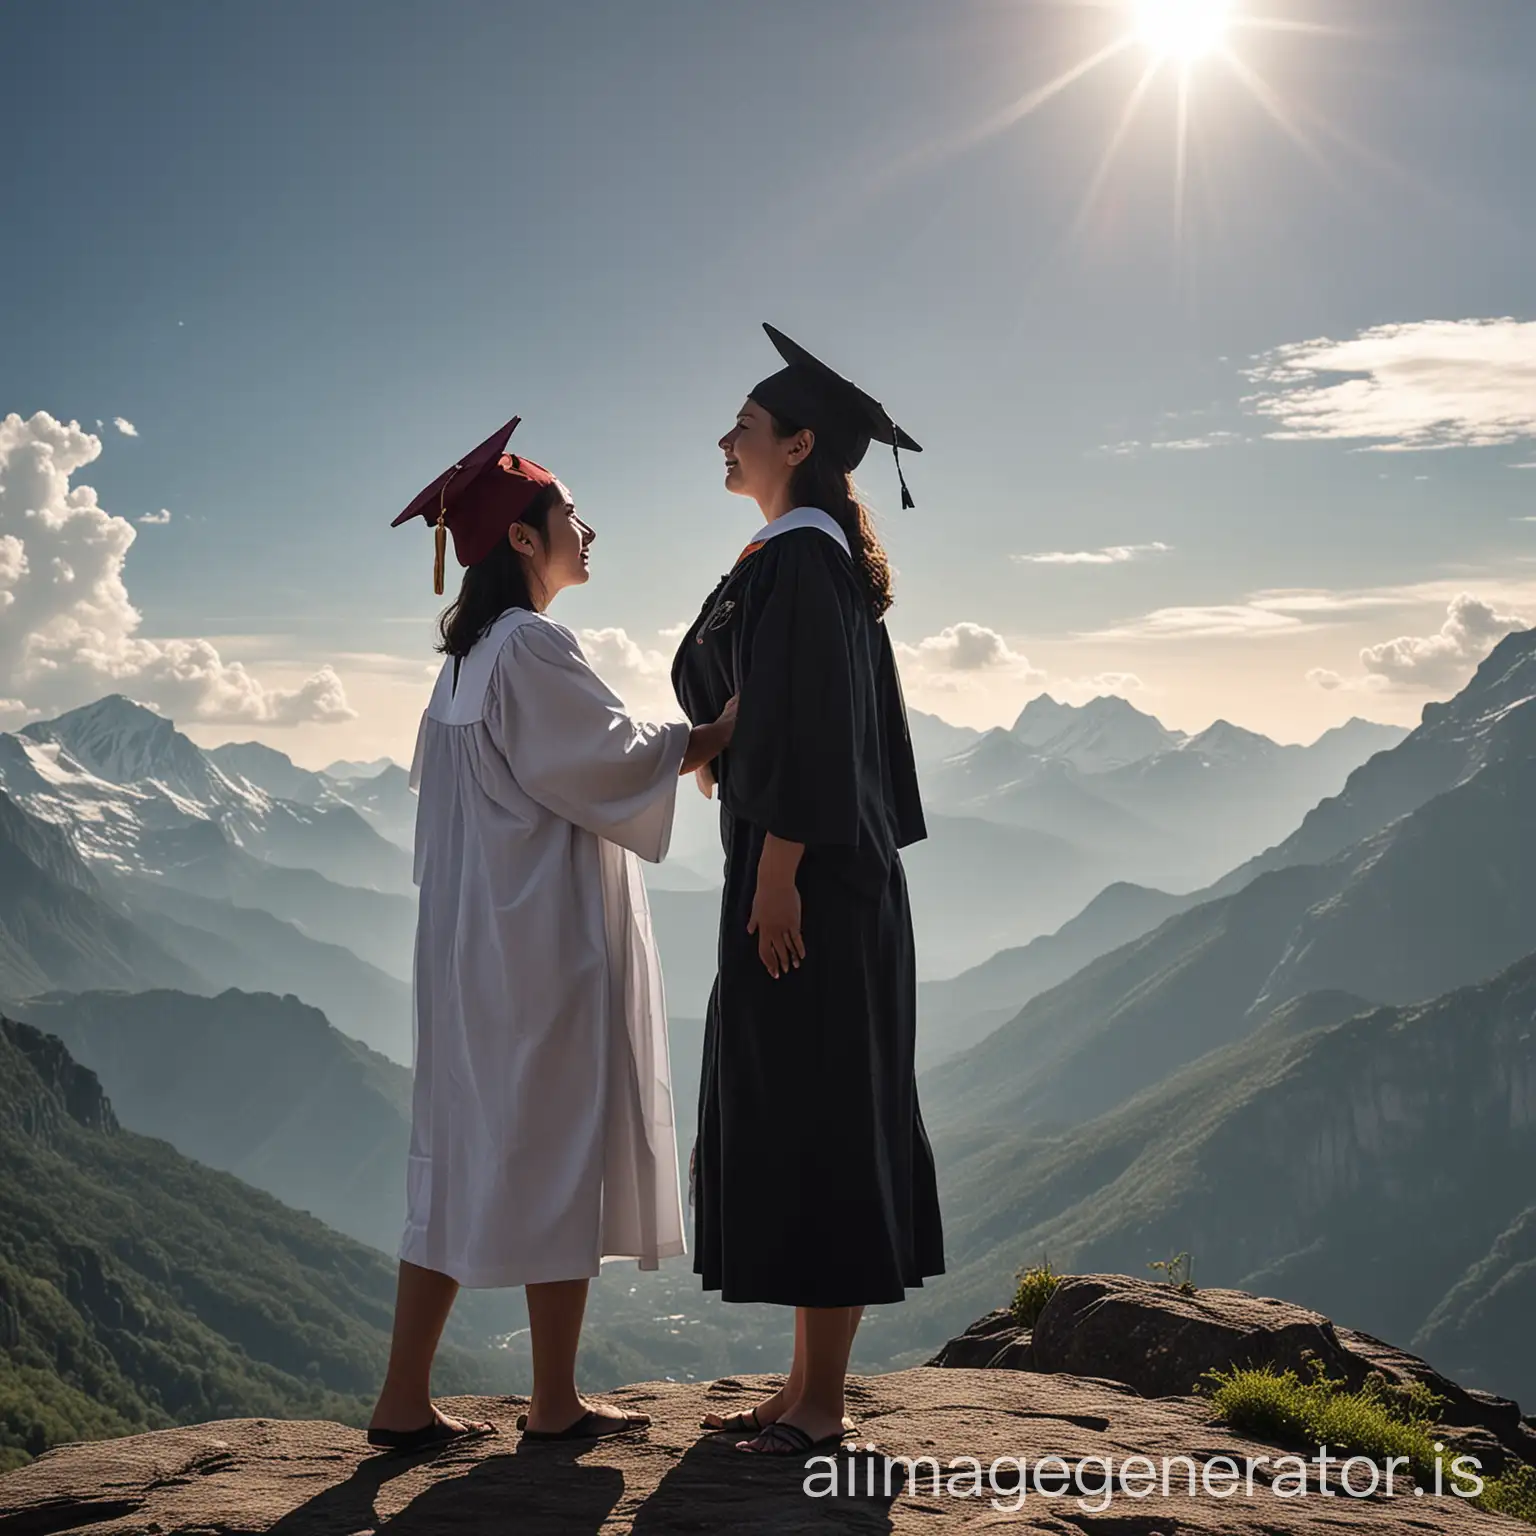 A 22-year-old student nurse, 169 cm tall, stands proudly in her graduation attire, radiating achievement. Beside her, her 47-year-old mother, 150 cm tall, gazes at her with overflowing emotions. the mother is not wearing toga and cap.  facing each other silhouette in a mountain